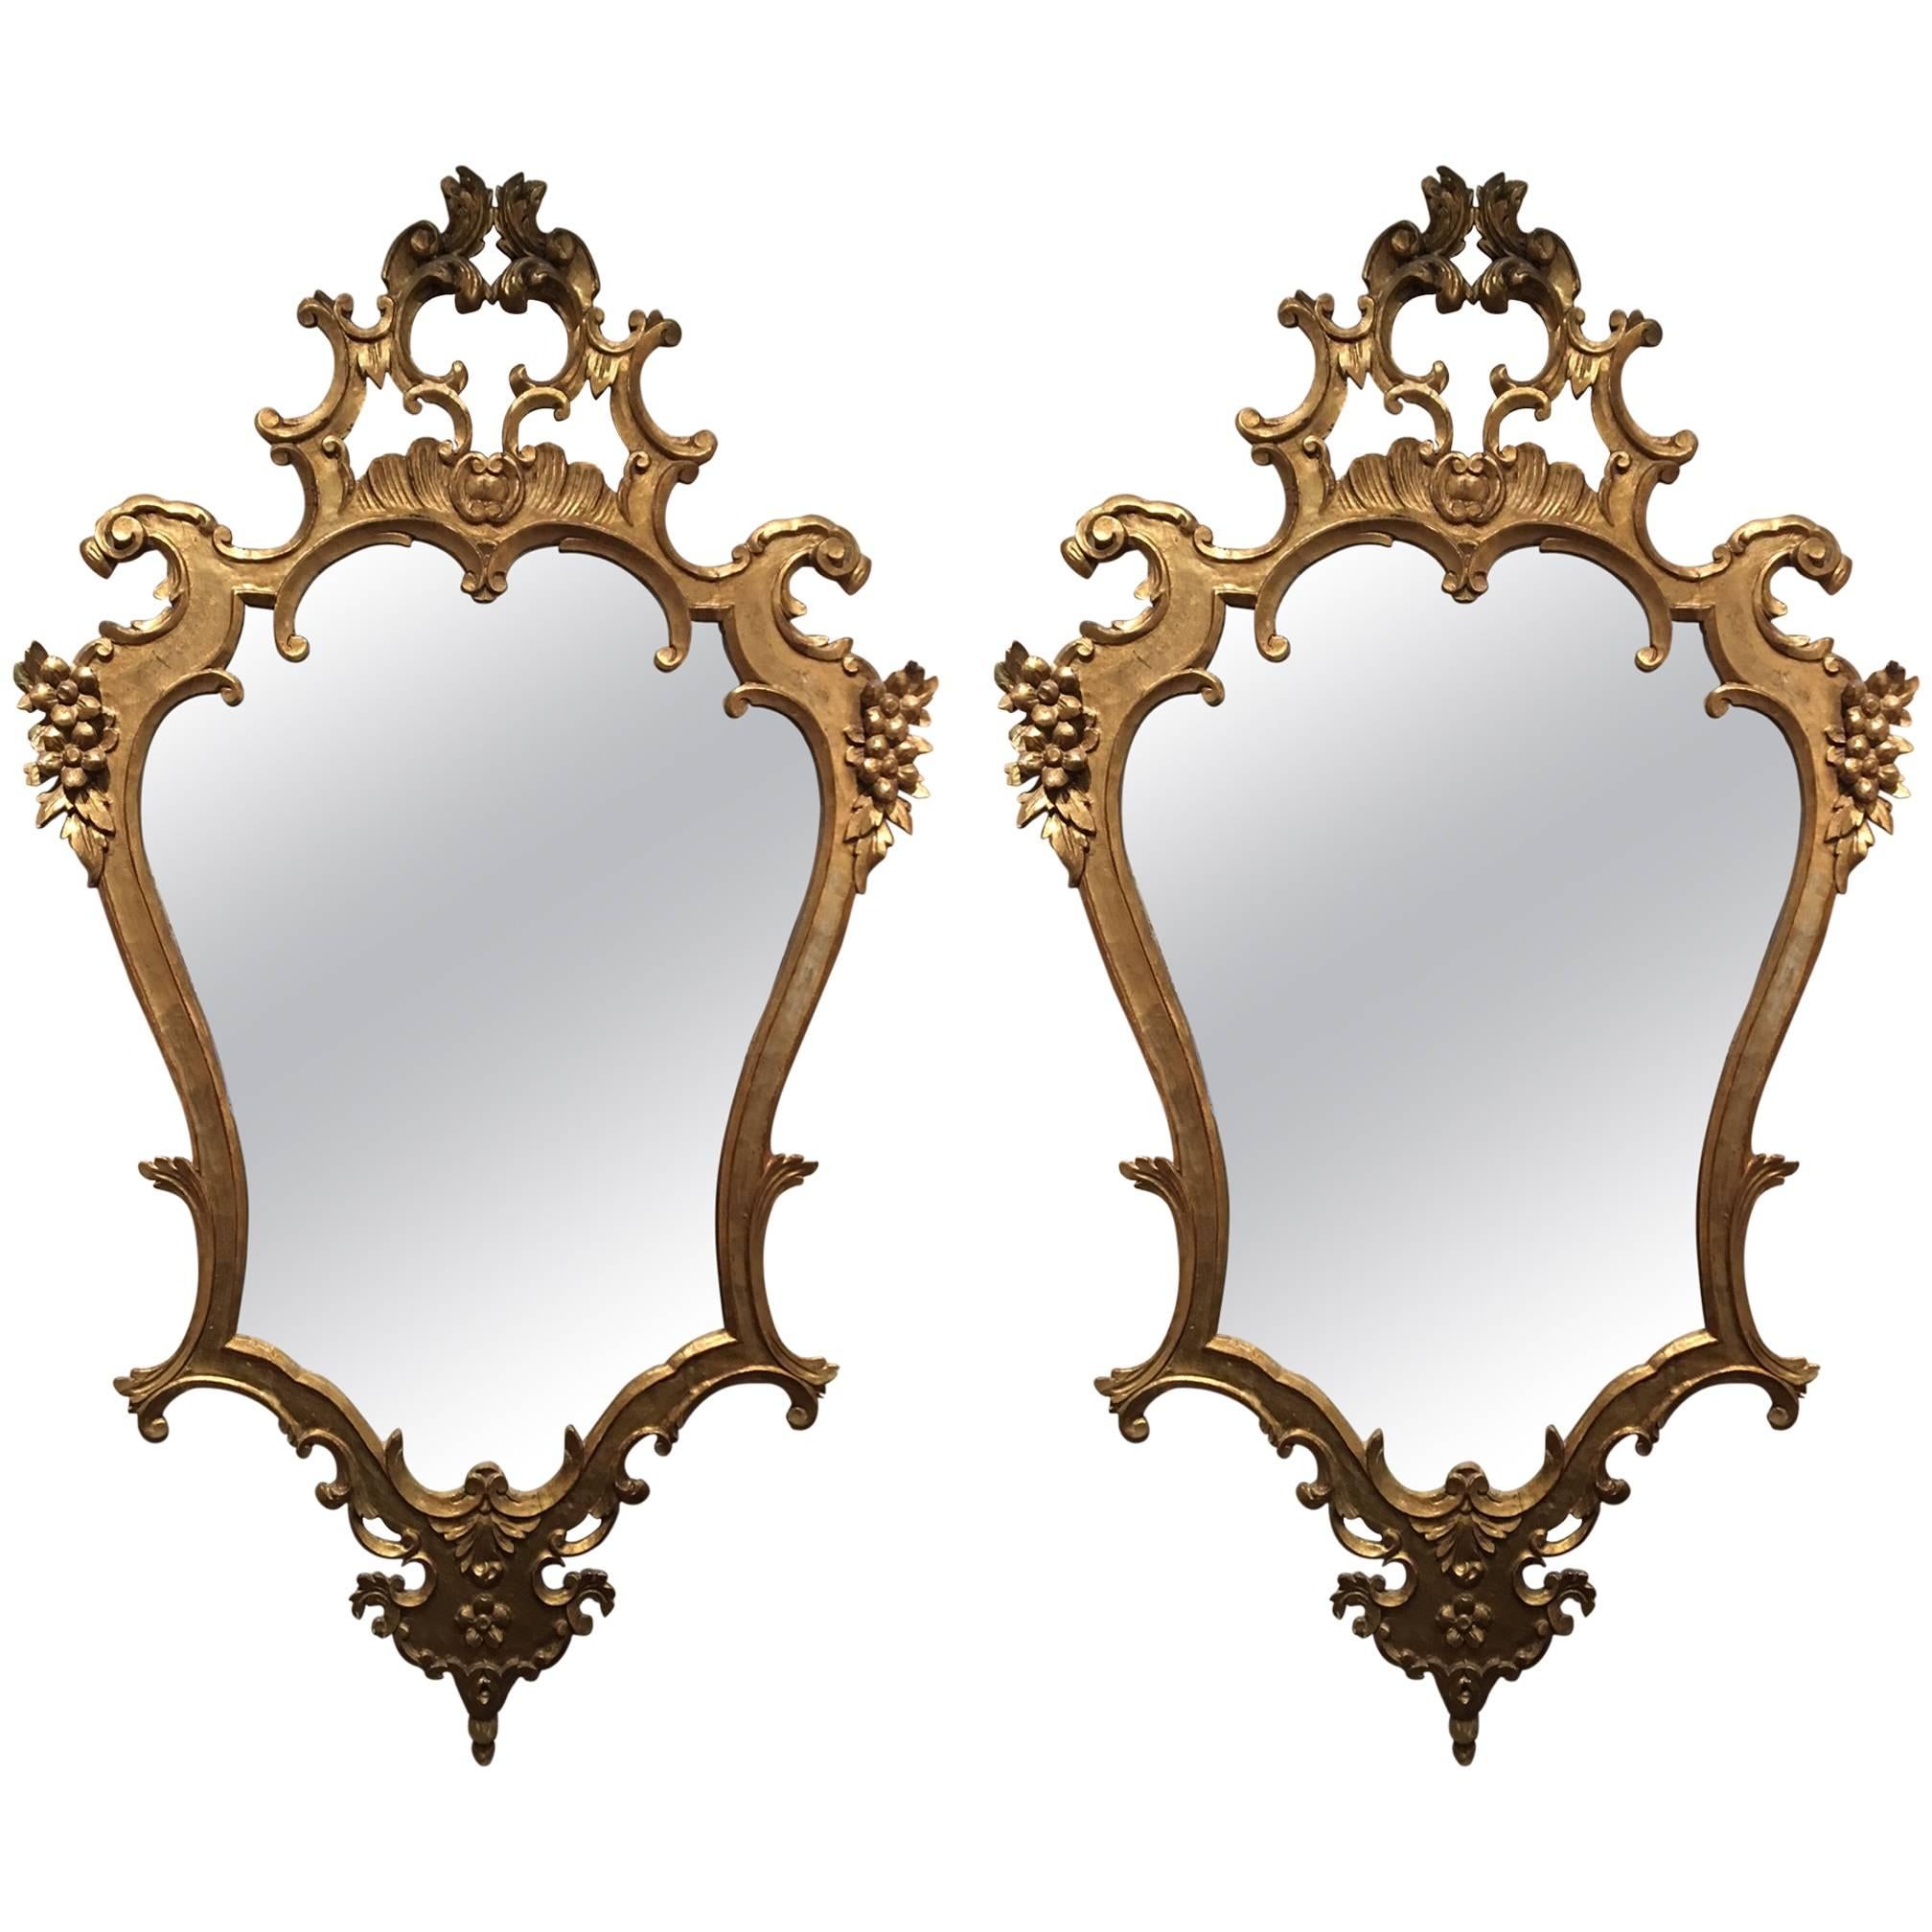 Pair of Italian Rococo Style Carved Giltwood Mirrors, Early 20th Century